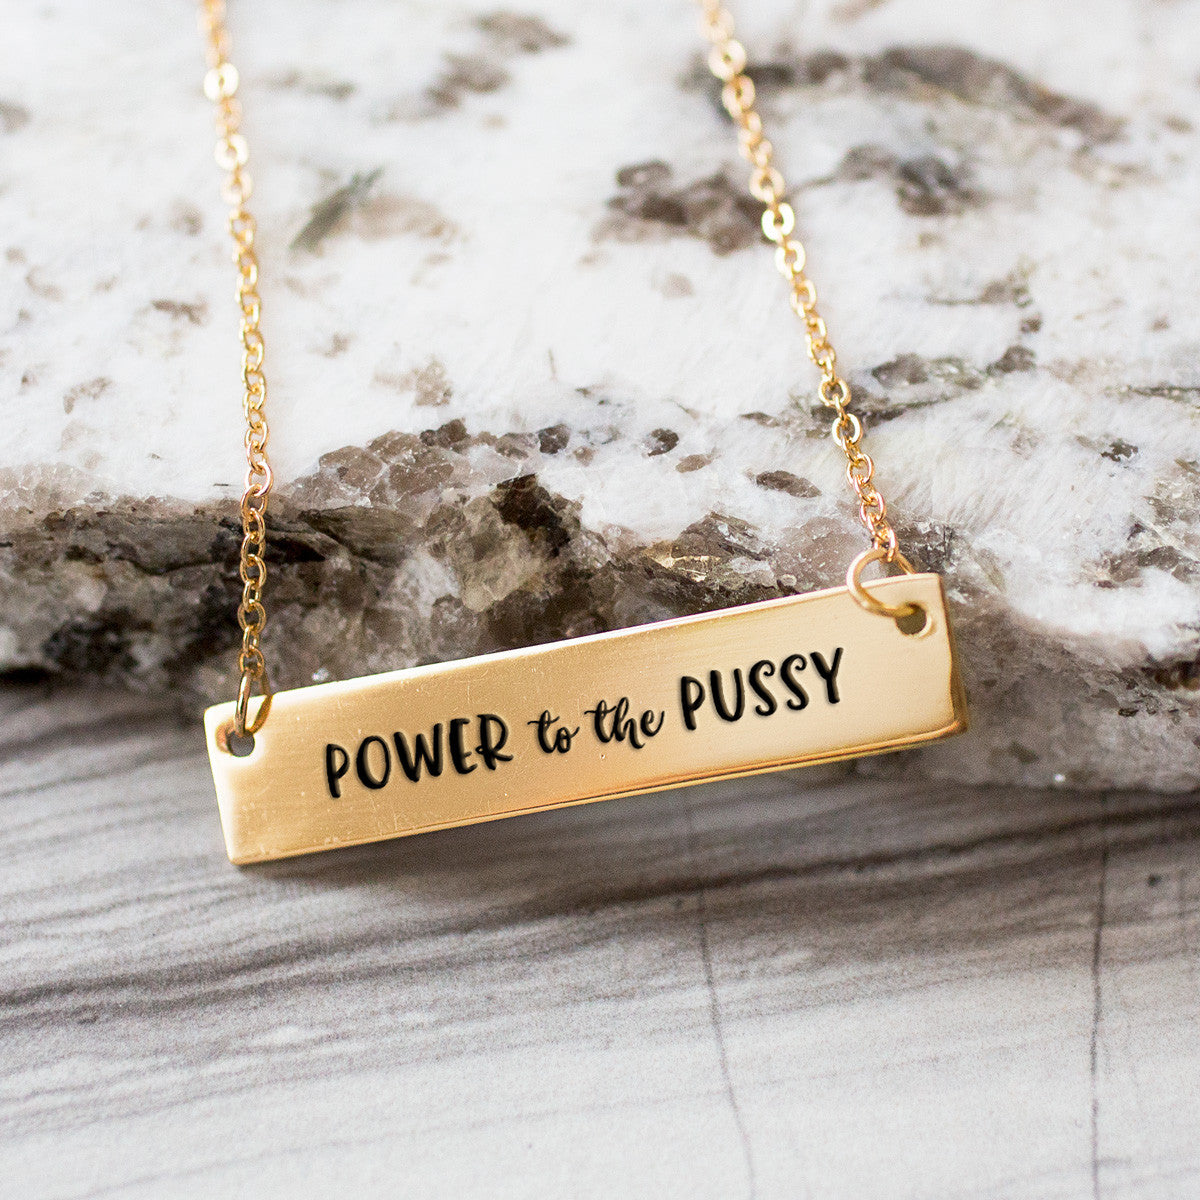 Power to the Pussy Gold / Silver Bar Necklace - pipercleo.com